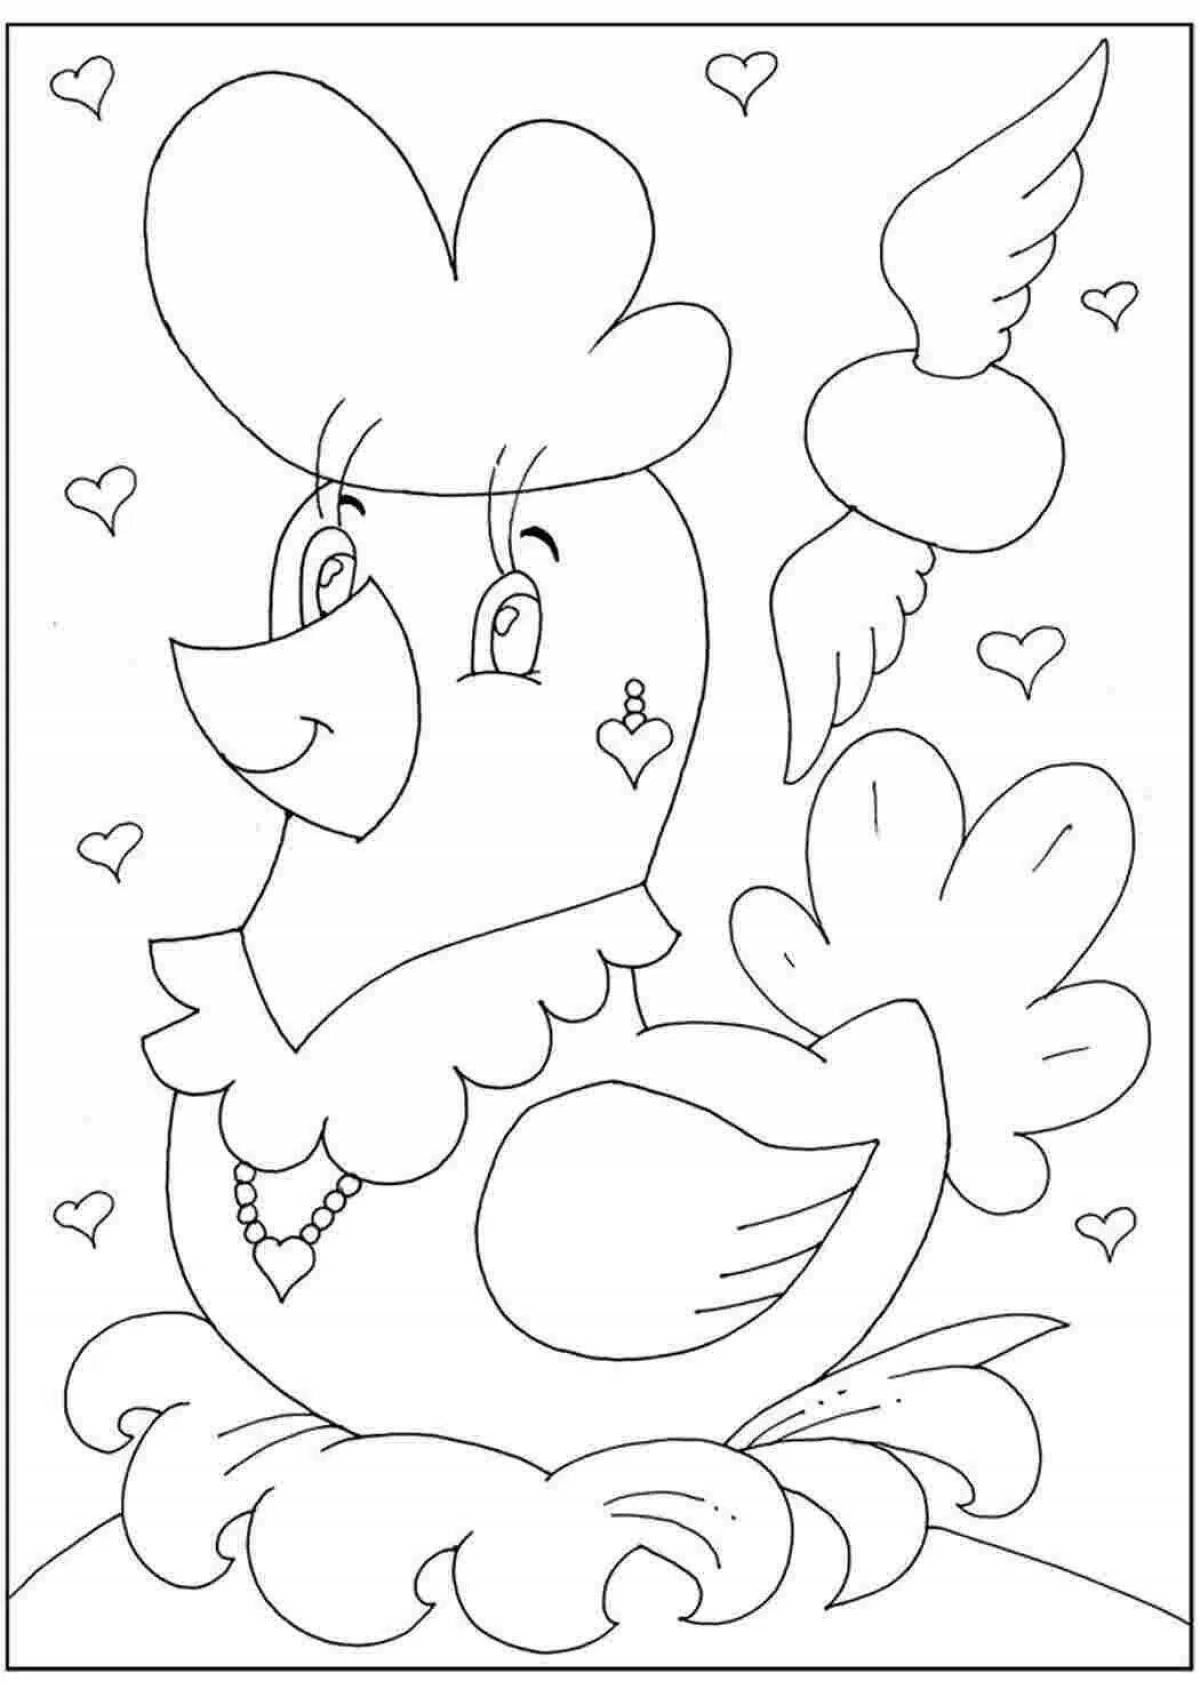 Gorgeous chick pockmarked coloring book for kids